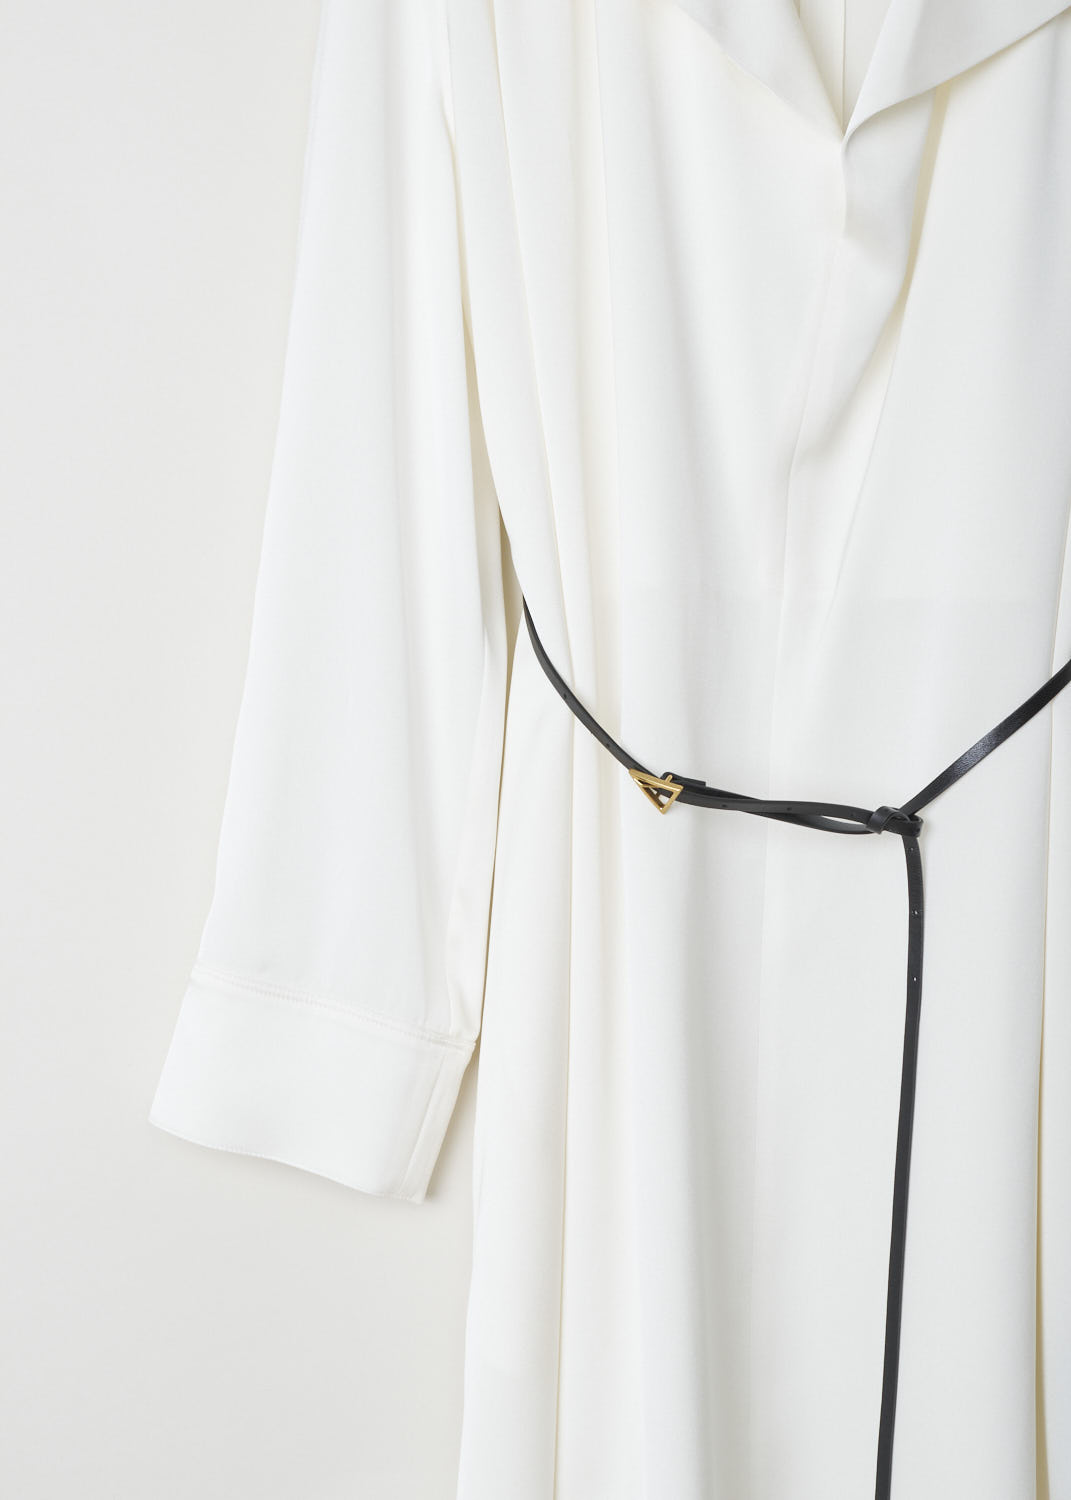 BOTTEGA VENETA, WHITE SILK DRESS WITH CONTRASTING BELT, 606454_VKJ90_8329, White, Detail, This silky smooth, long sleeved dress has a deep V-neck with an exaggerated pliable collar. Across the shoulders, dainty little pleats can be found. The dress comes with a thin, contrasting black belt in leather, with its belt buckle being the recognizable gold-toned triangle.  
